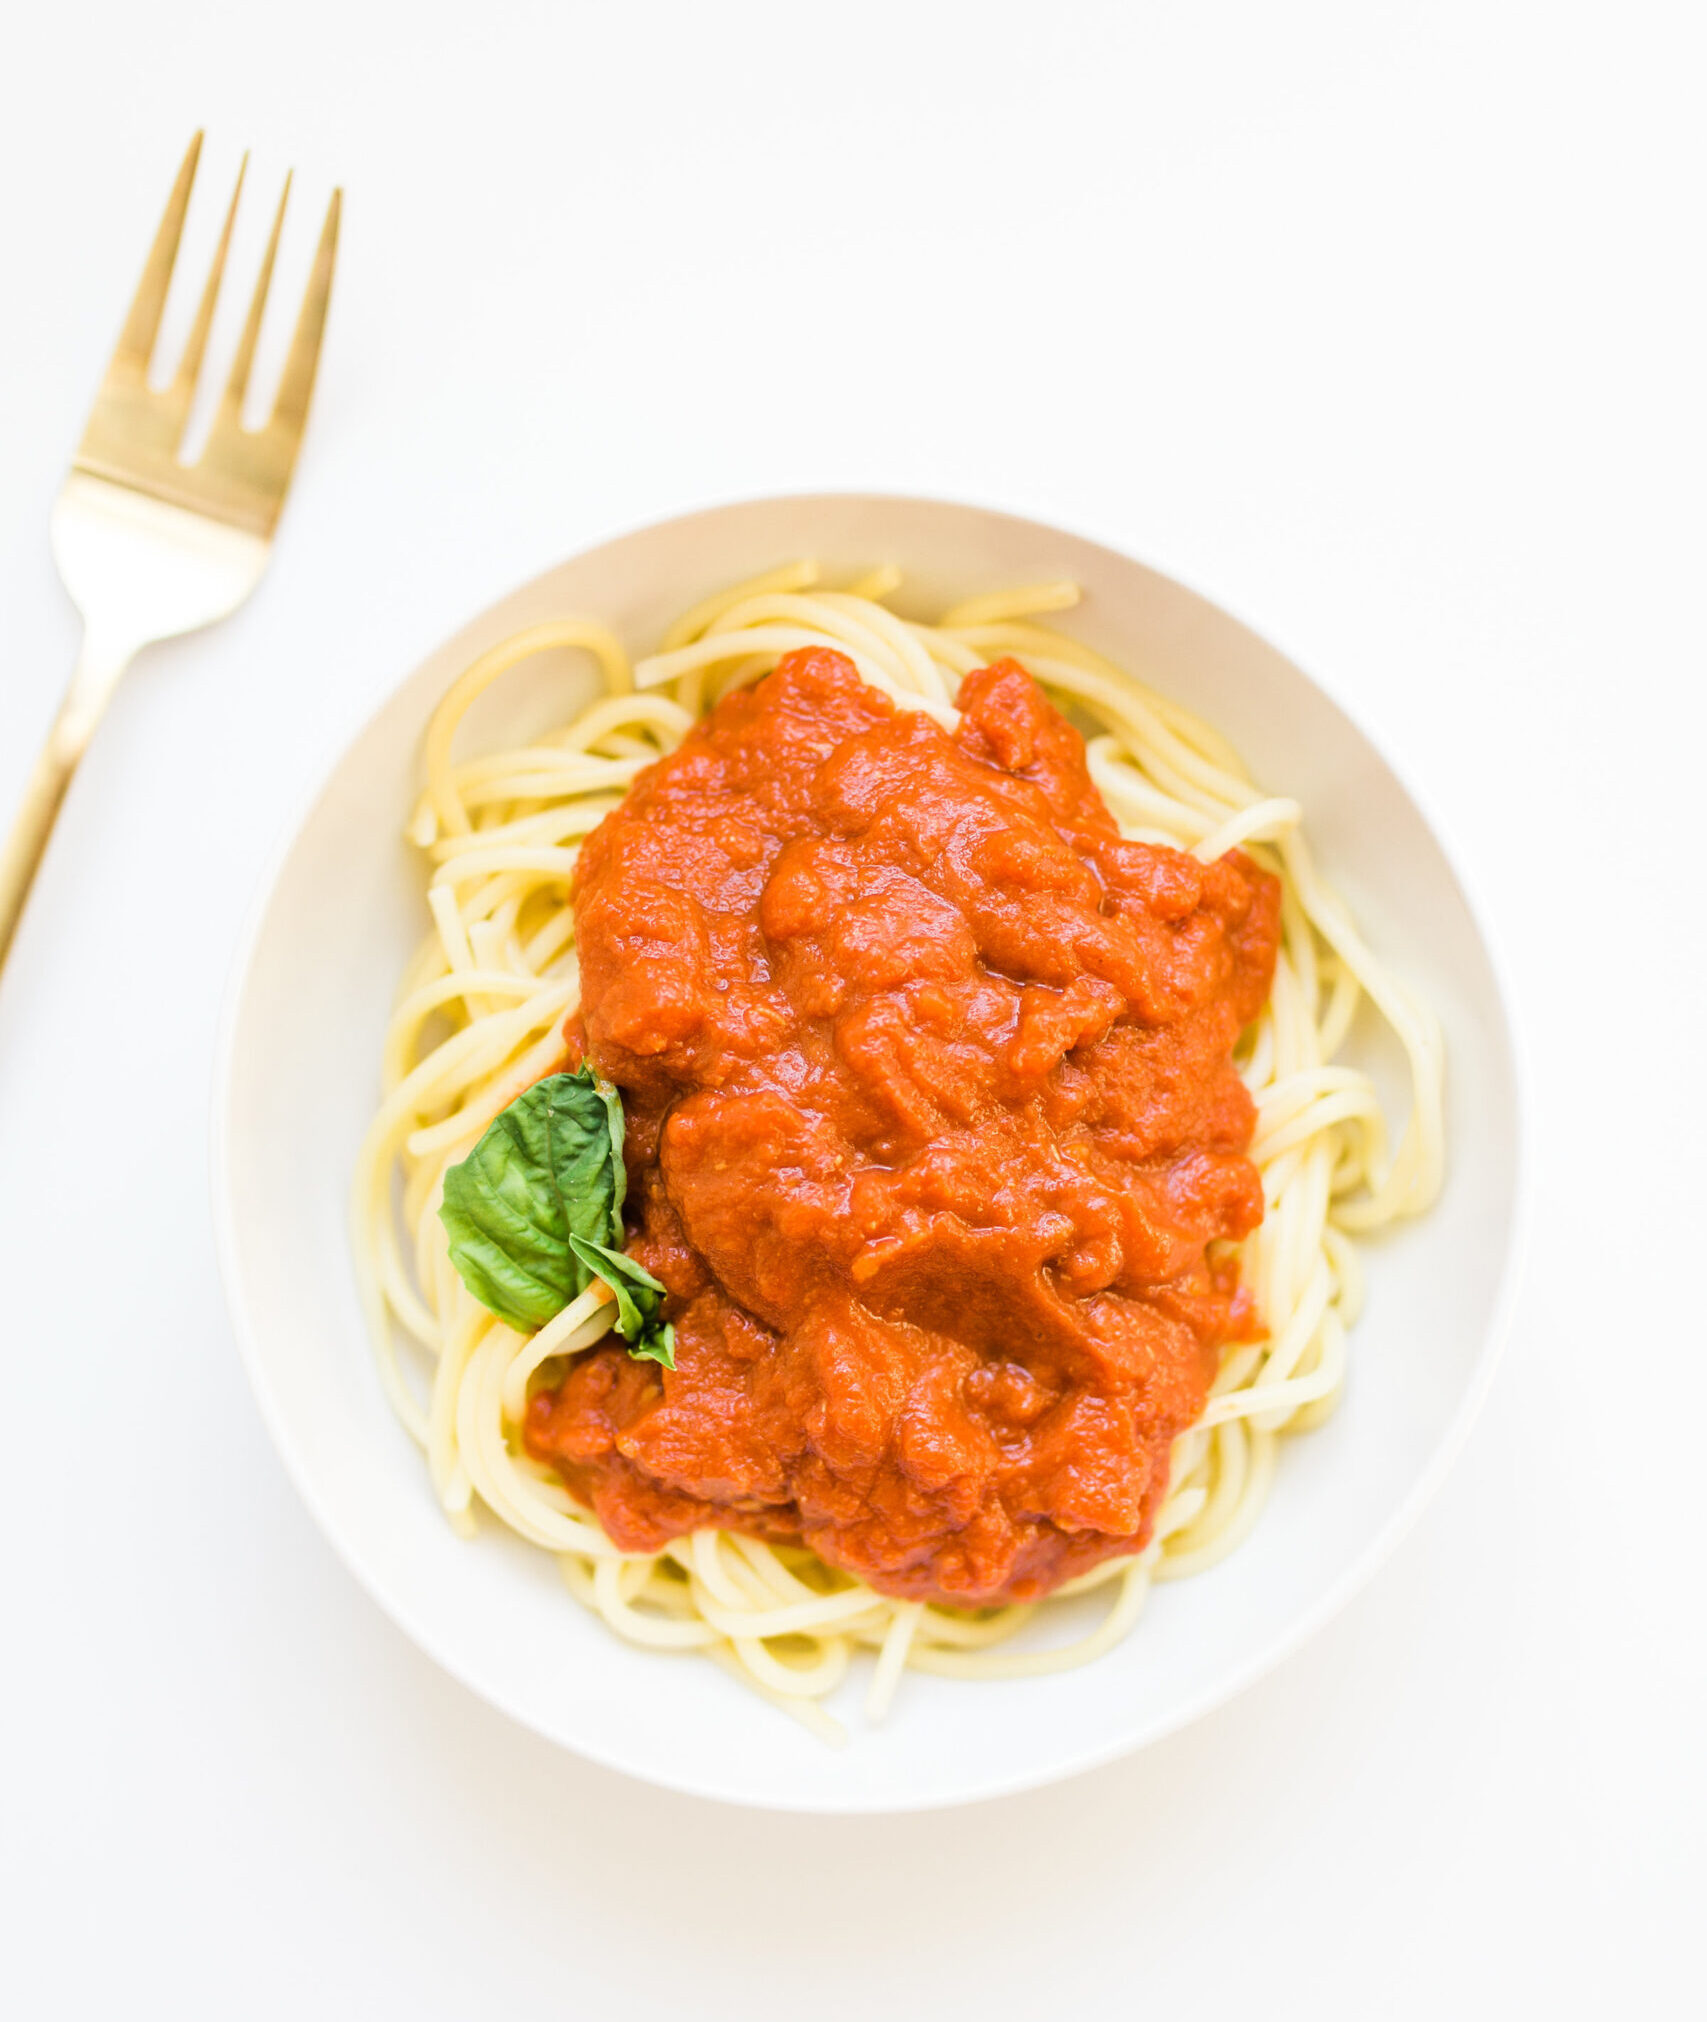 These family-friendly meals use pantry ingredients like beans, lentils, canned goods, pasta, rice, and broth, plus or minus staples that keep well in the freezer or refrigerator. These flexible recipes are all about using what you have on hand to make easy, delicious lunches and dinners! | glitterinc.com | @glitterinc // Classic Marinara Sauce - 3-Ingredient Tomato Butter Sauce